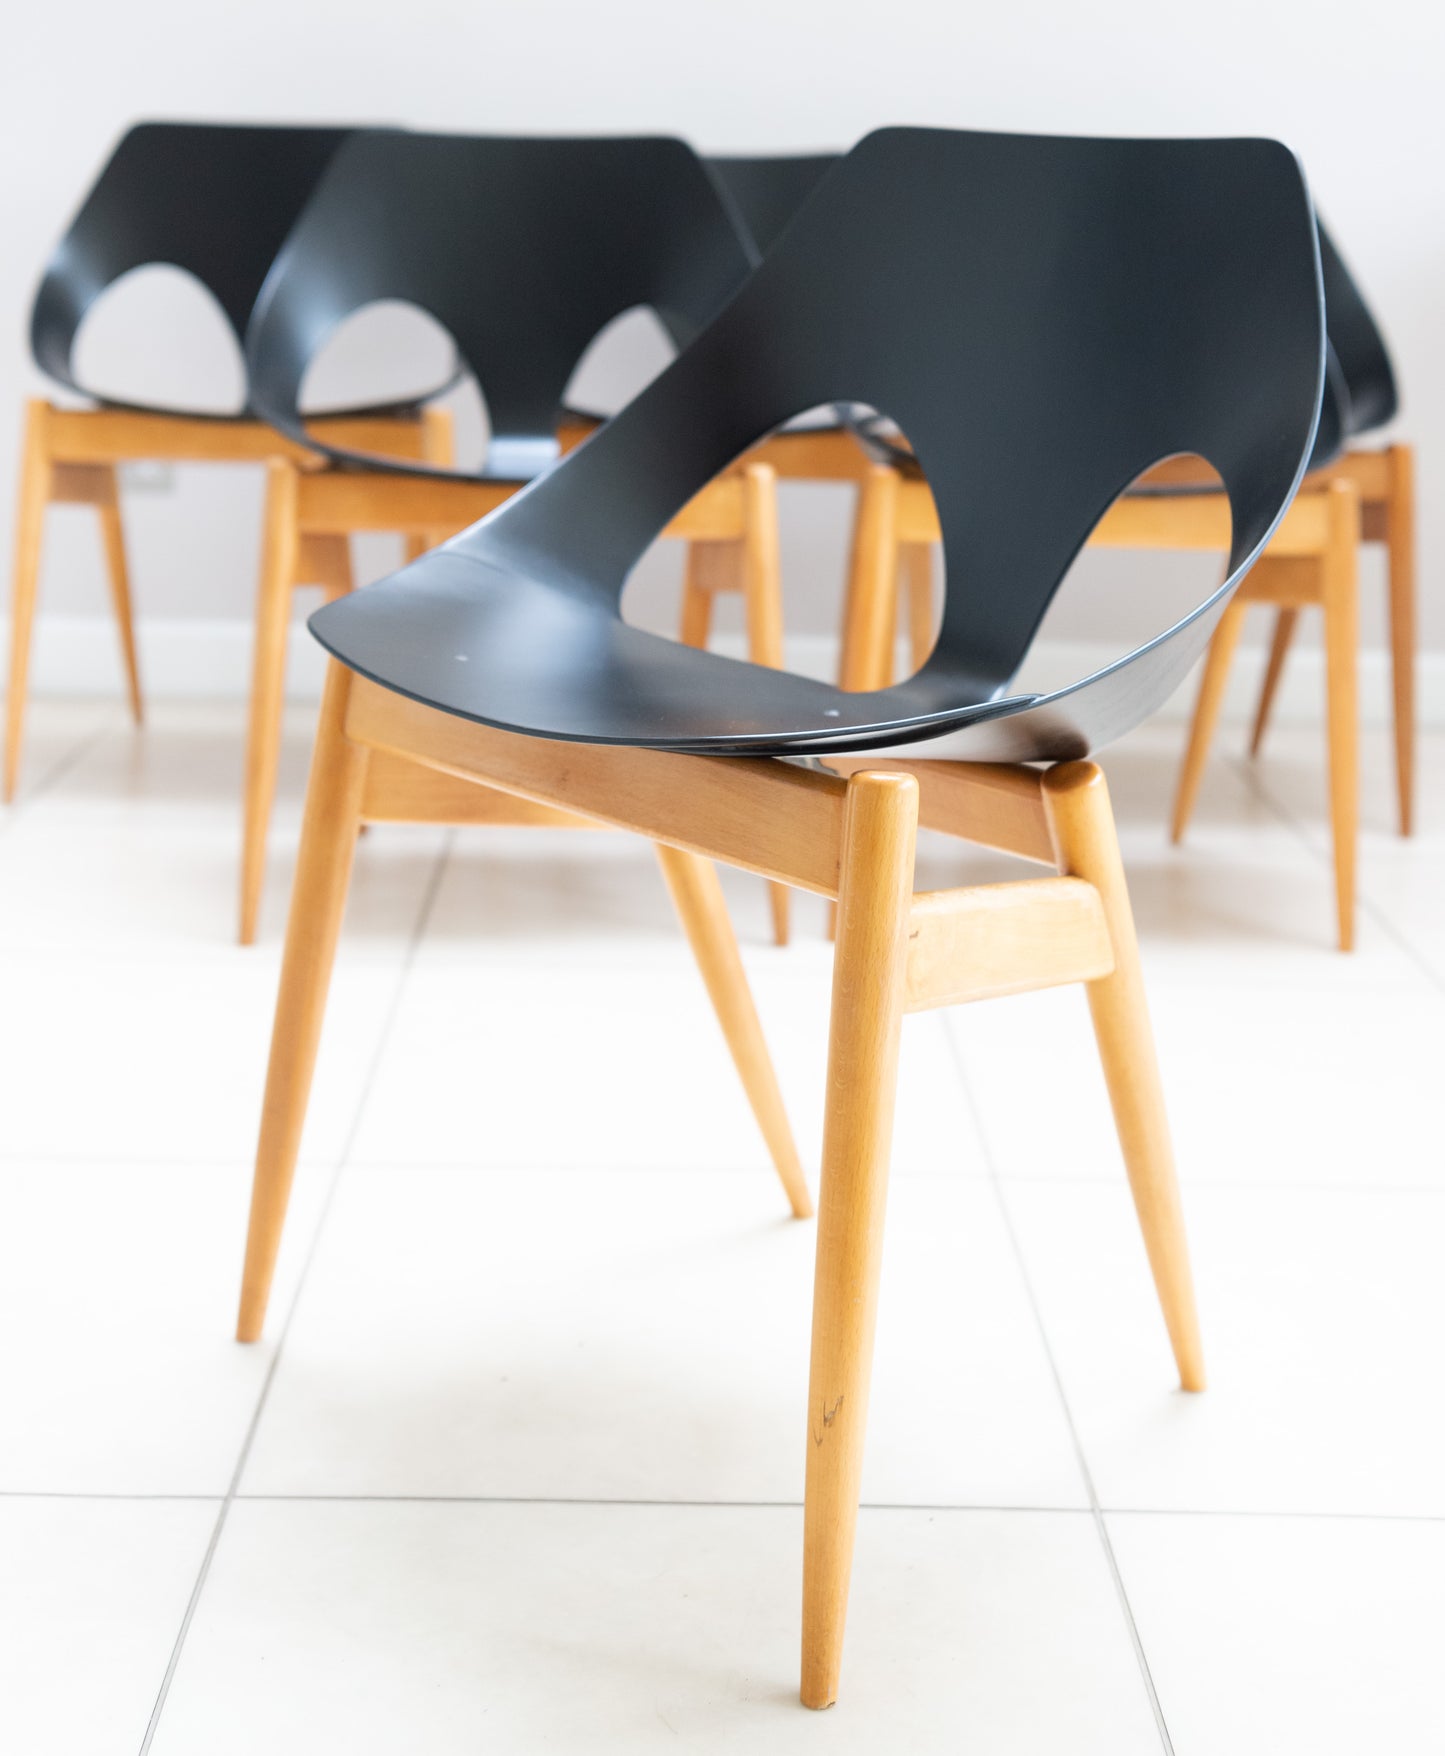 Iconic set of matching Jason chairs designed by Carl Jacobs for Kandya.